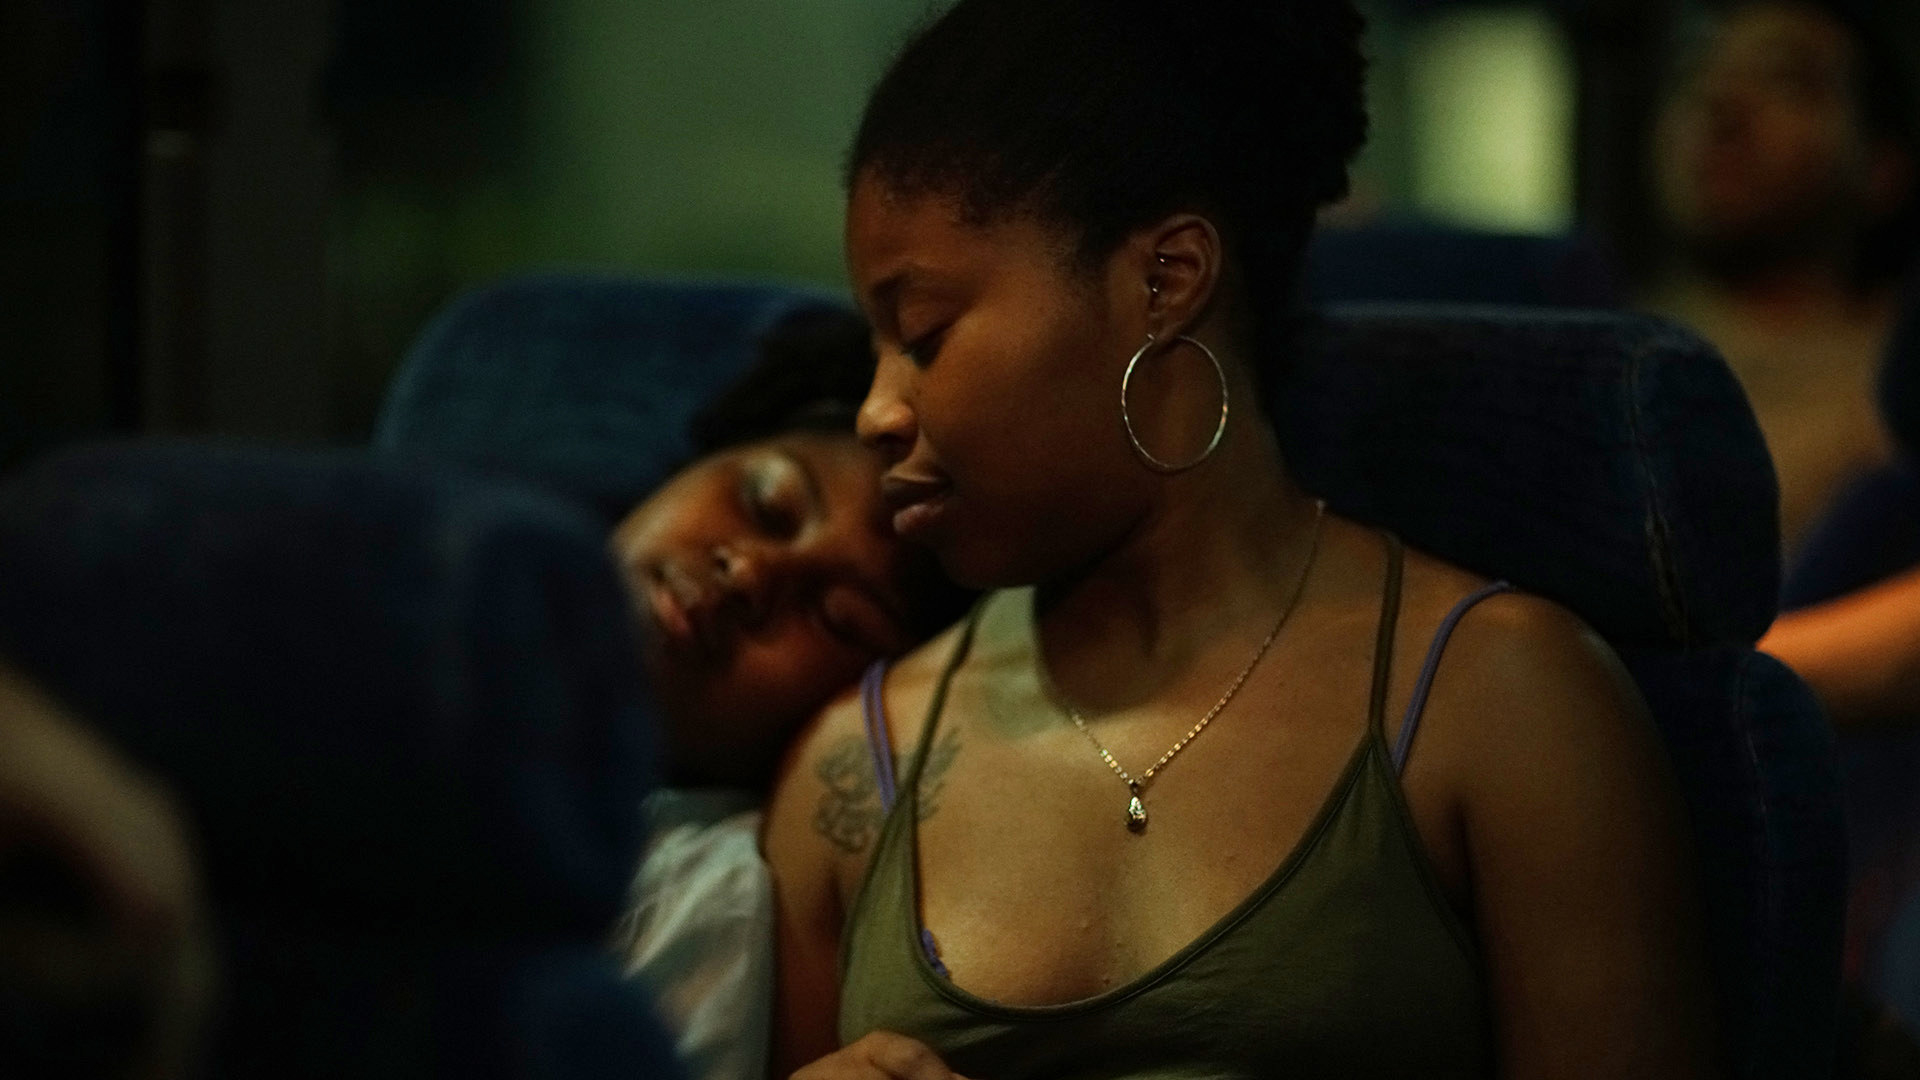 dominique fishback sitting in a seat on the bus as she looks down at her sibling who fell asleep on her shoulder